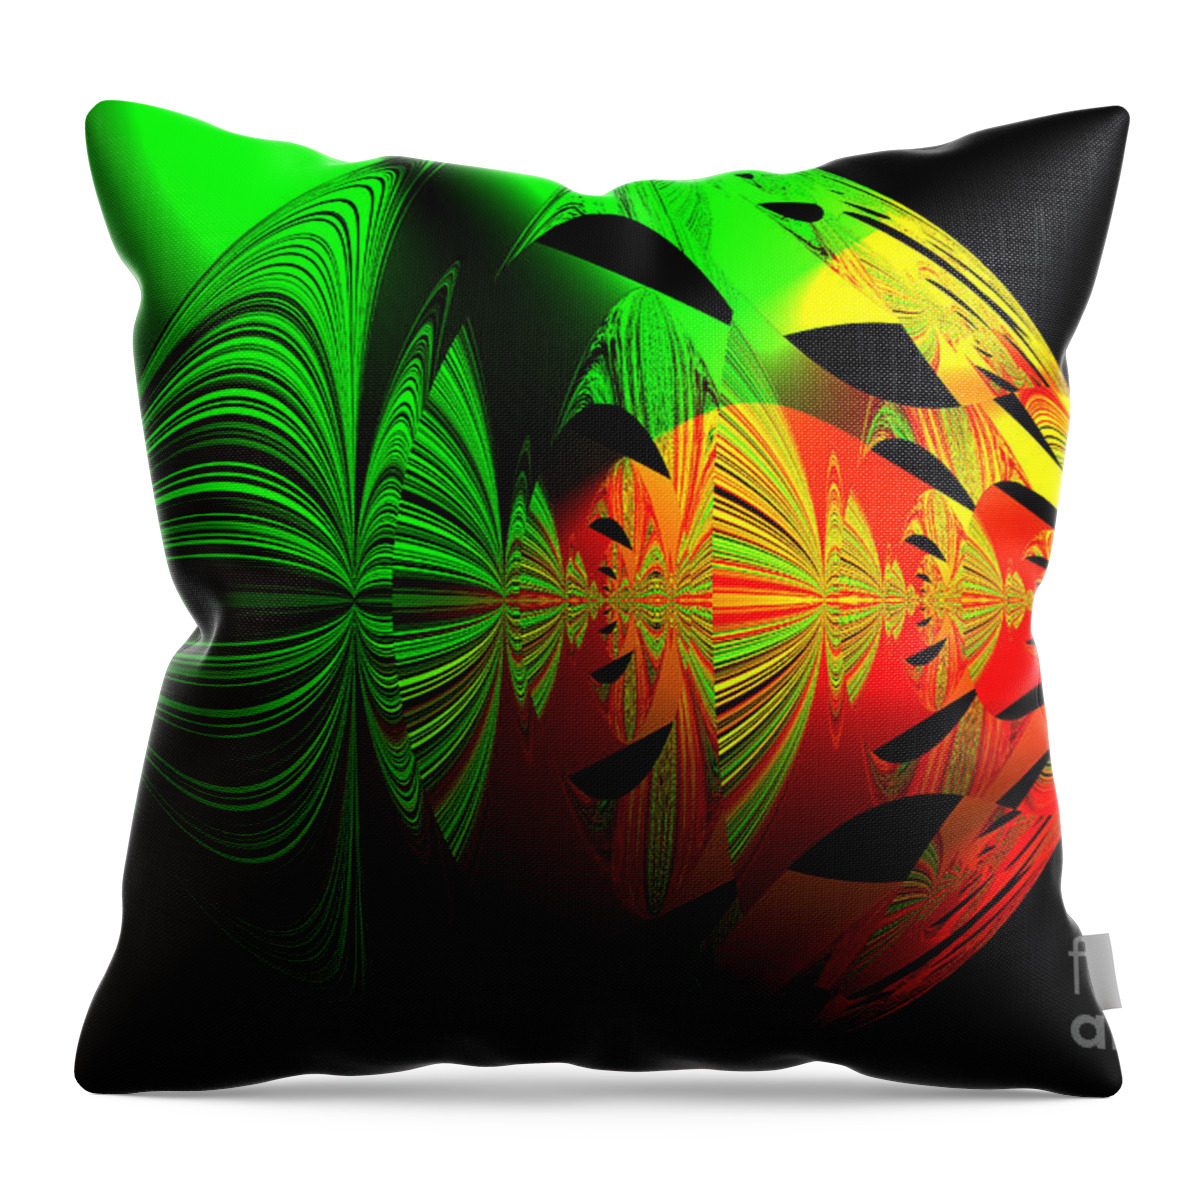 Unique Design Throw Pillow featuring the photograph Art. Unigue Design. Abstract Green Red and Black by Oksana Semenchenko